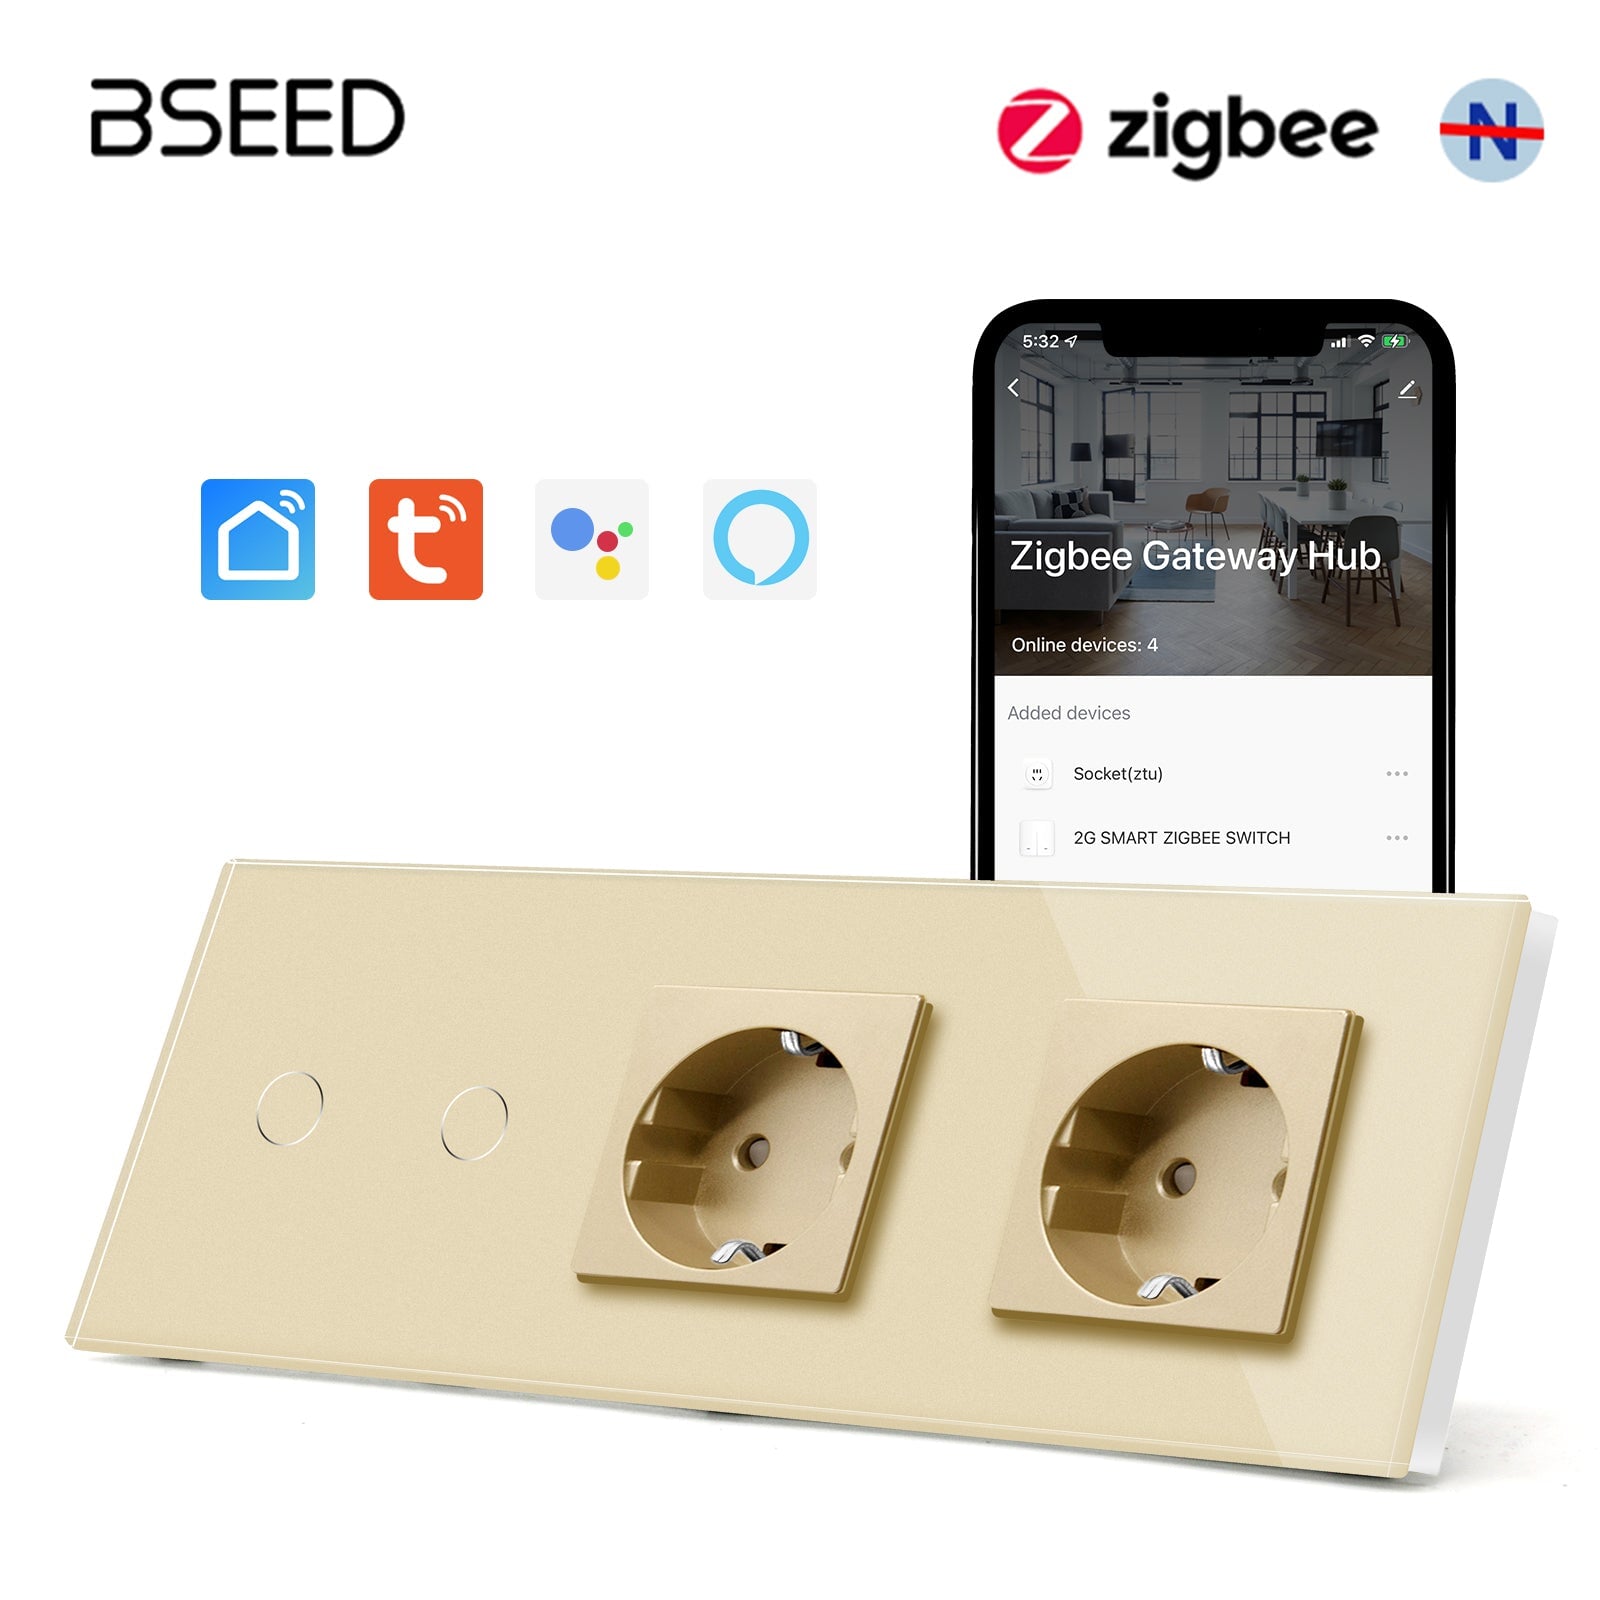 Bseed Zigbee Touch 1/2/3 Gang Light Switches Single Live Line Multi Control With Double EU Standard Not Smart Wall Sockets Light Switches Bseedswitch Golden 2Gang 